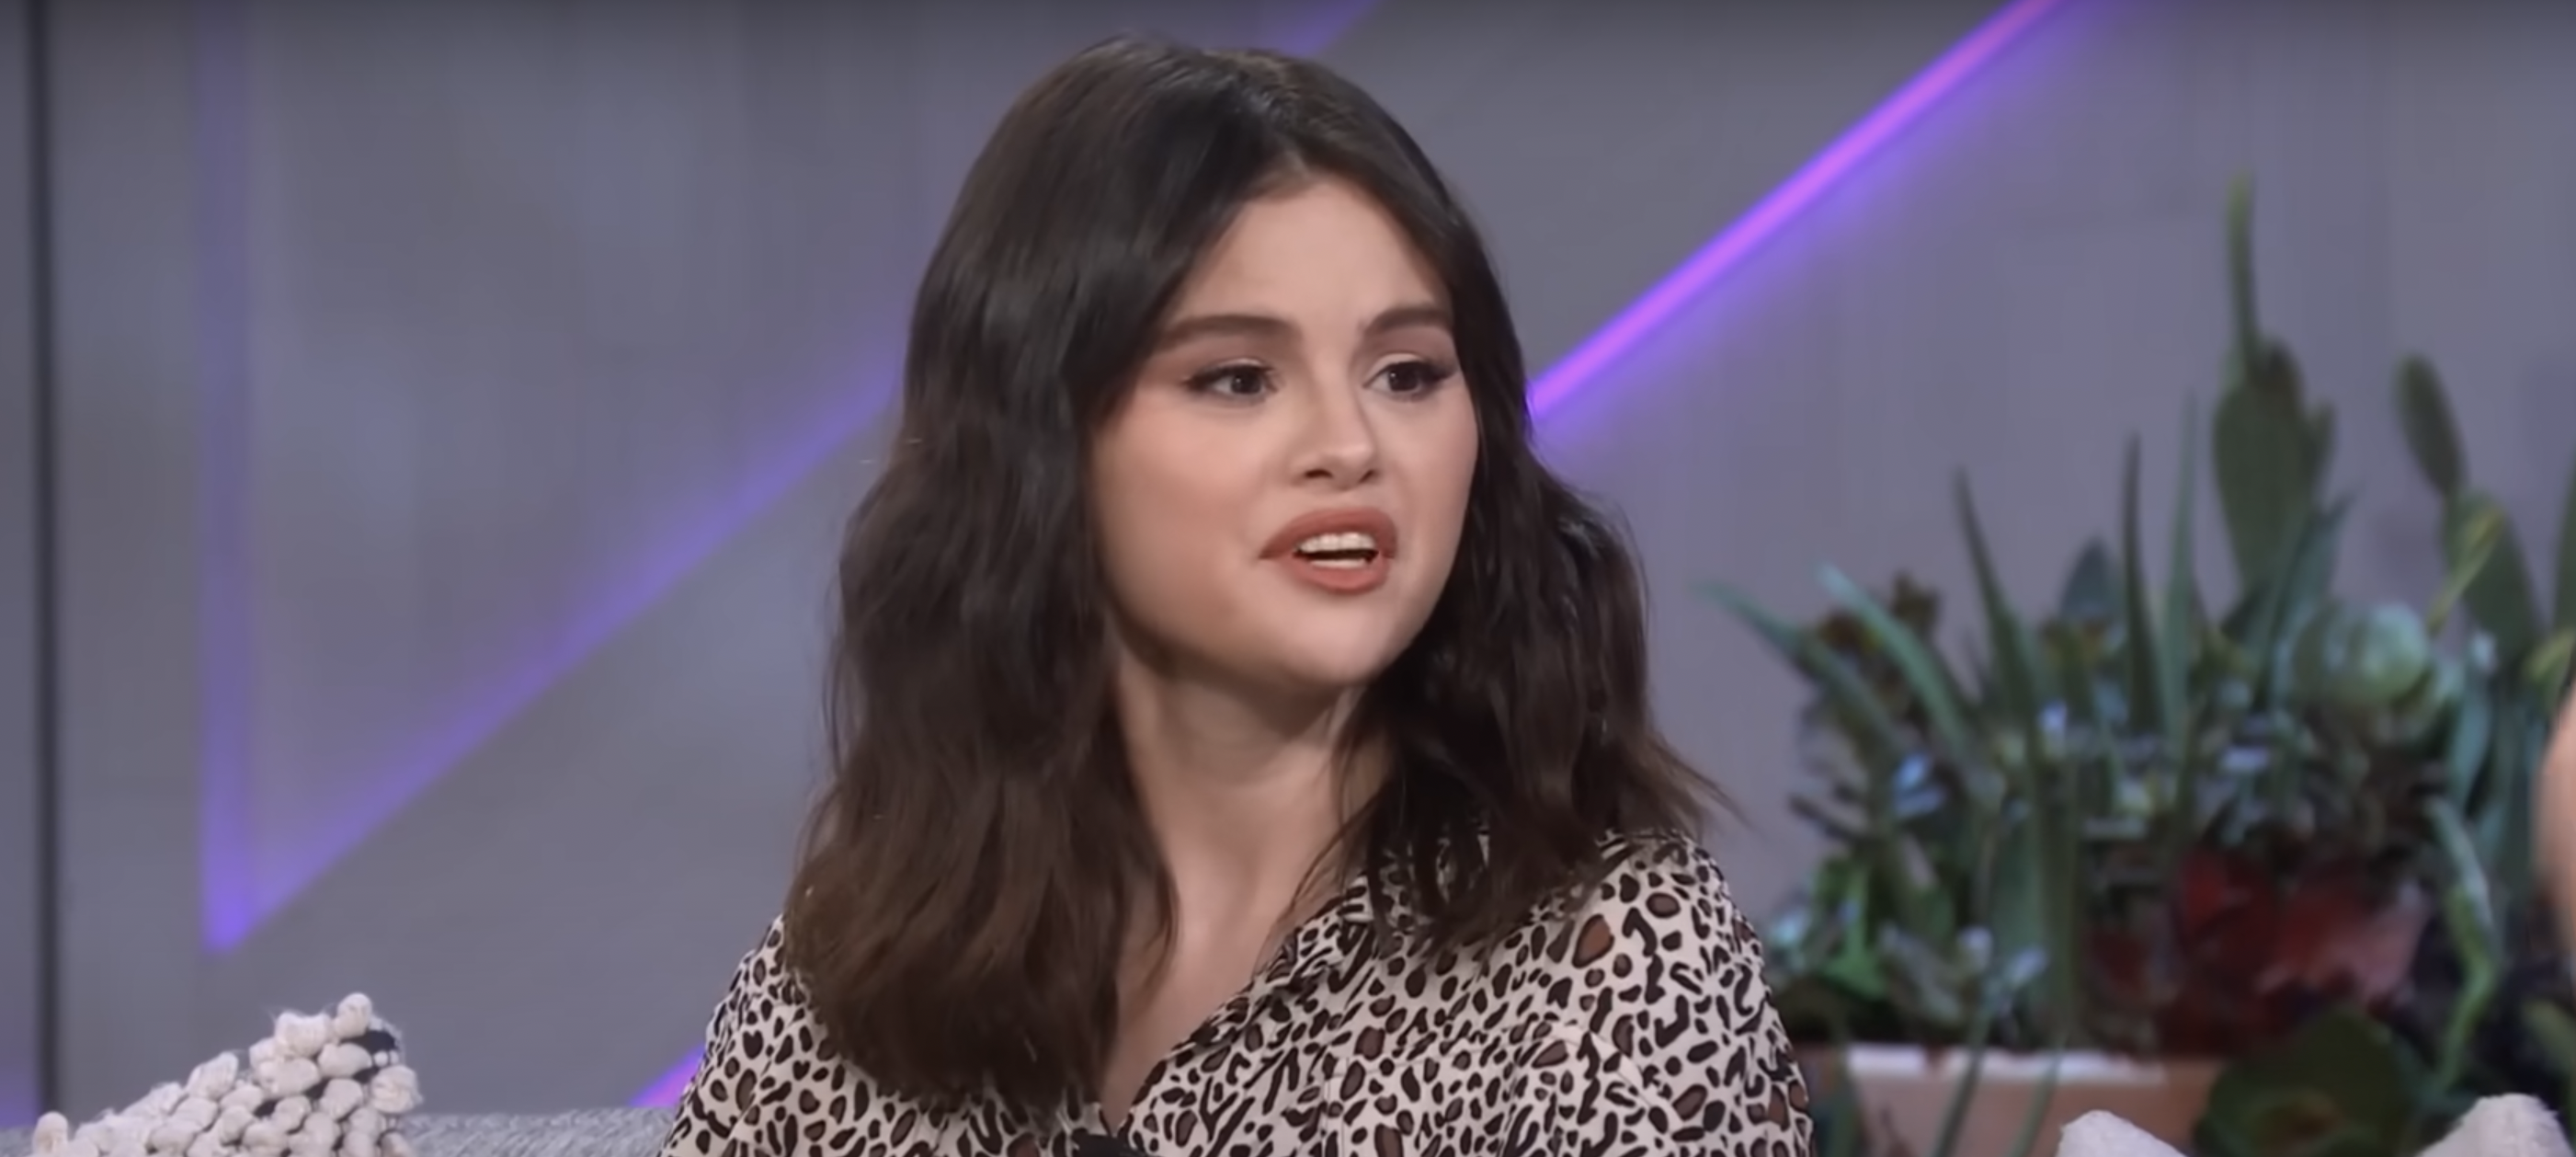 Selena Gomez Shares Requirements Men Have To Meet To Date Her